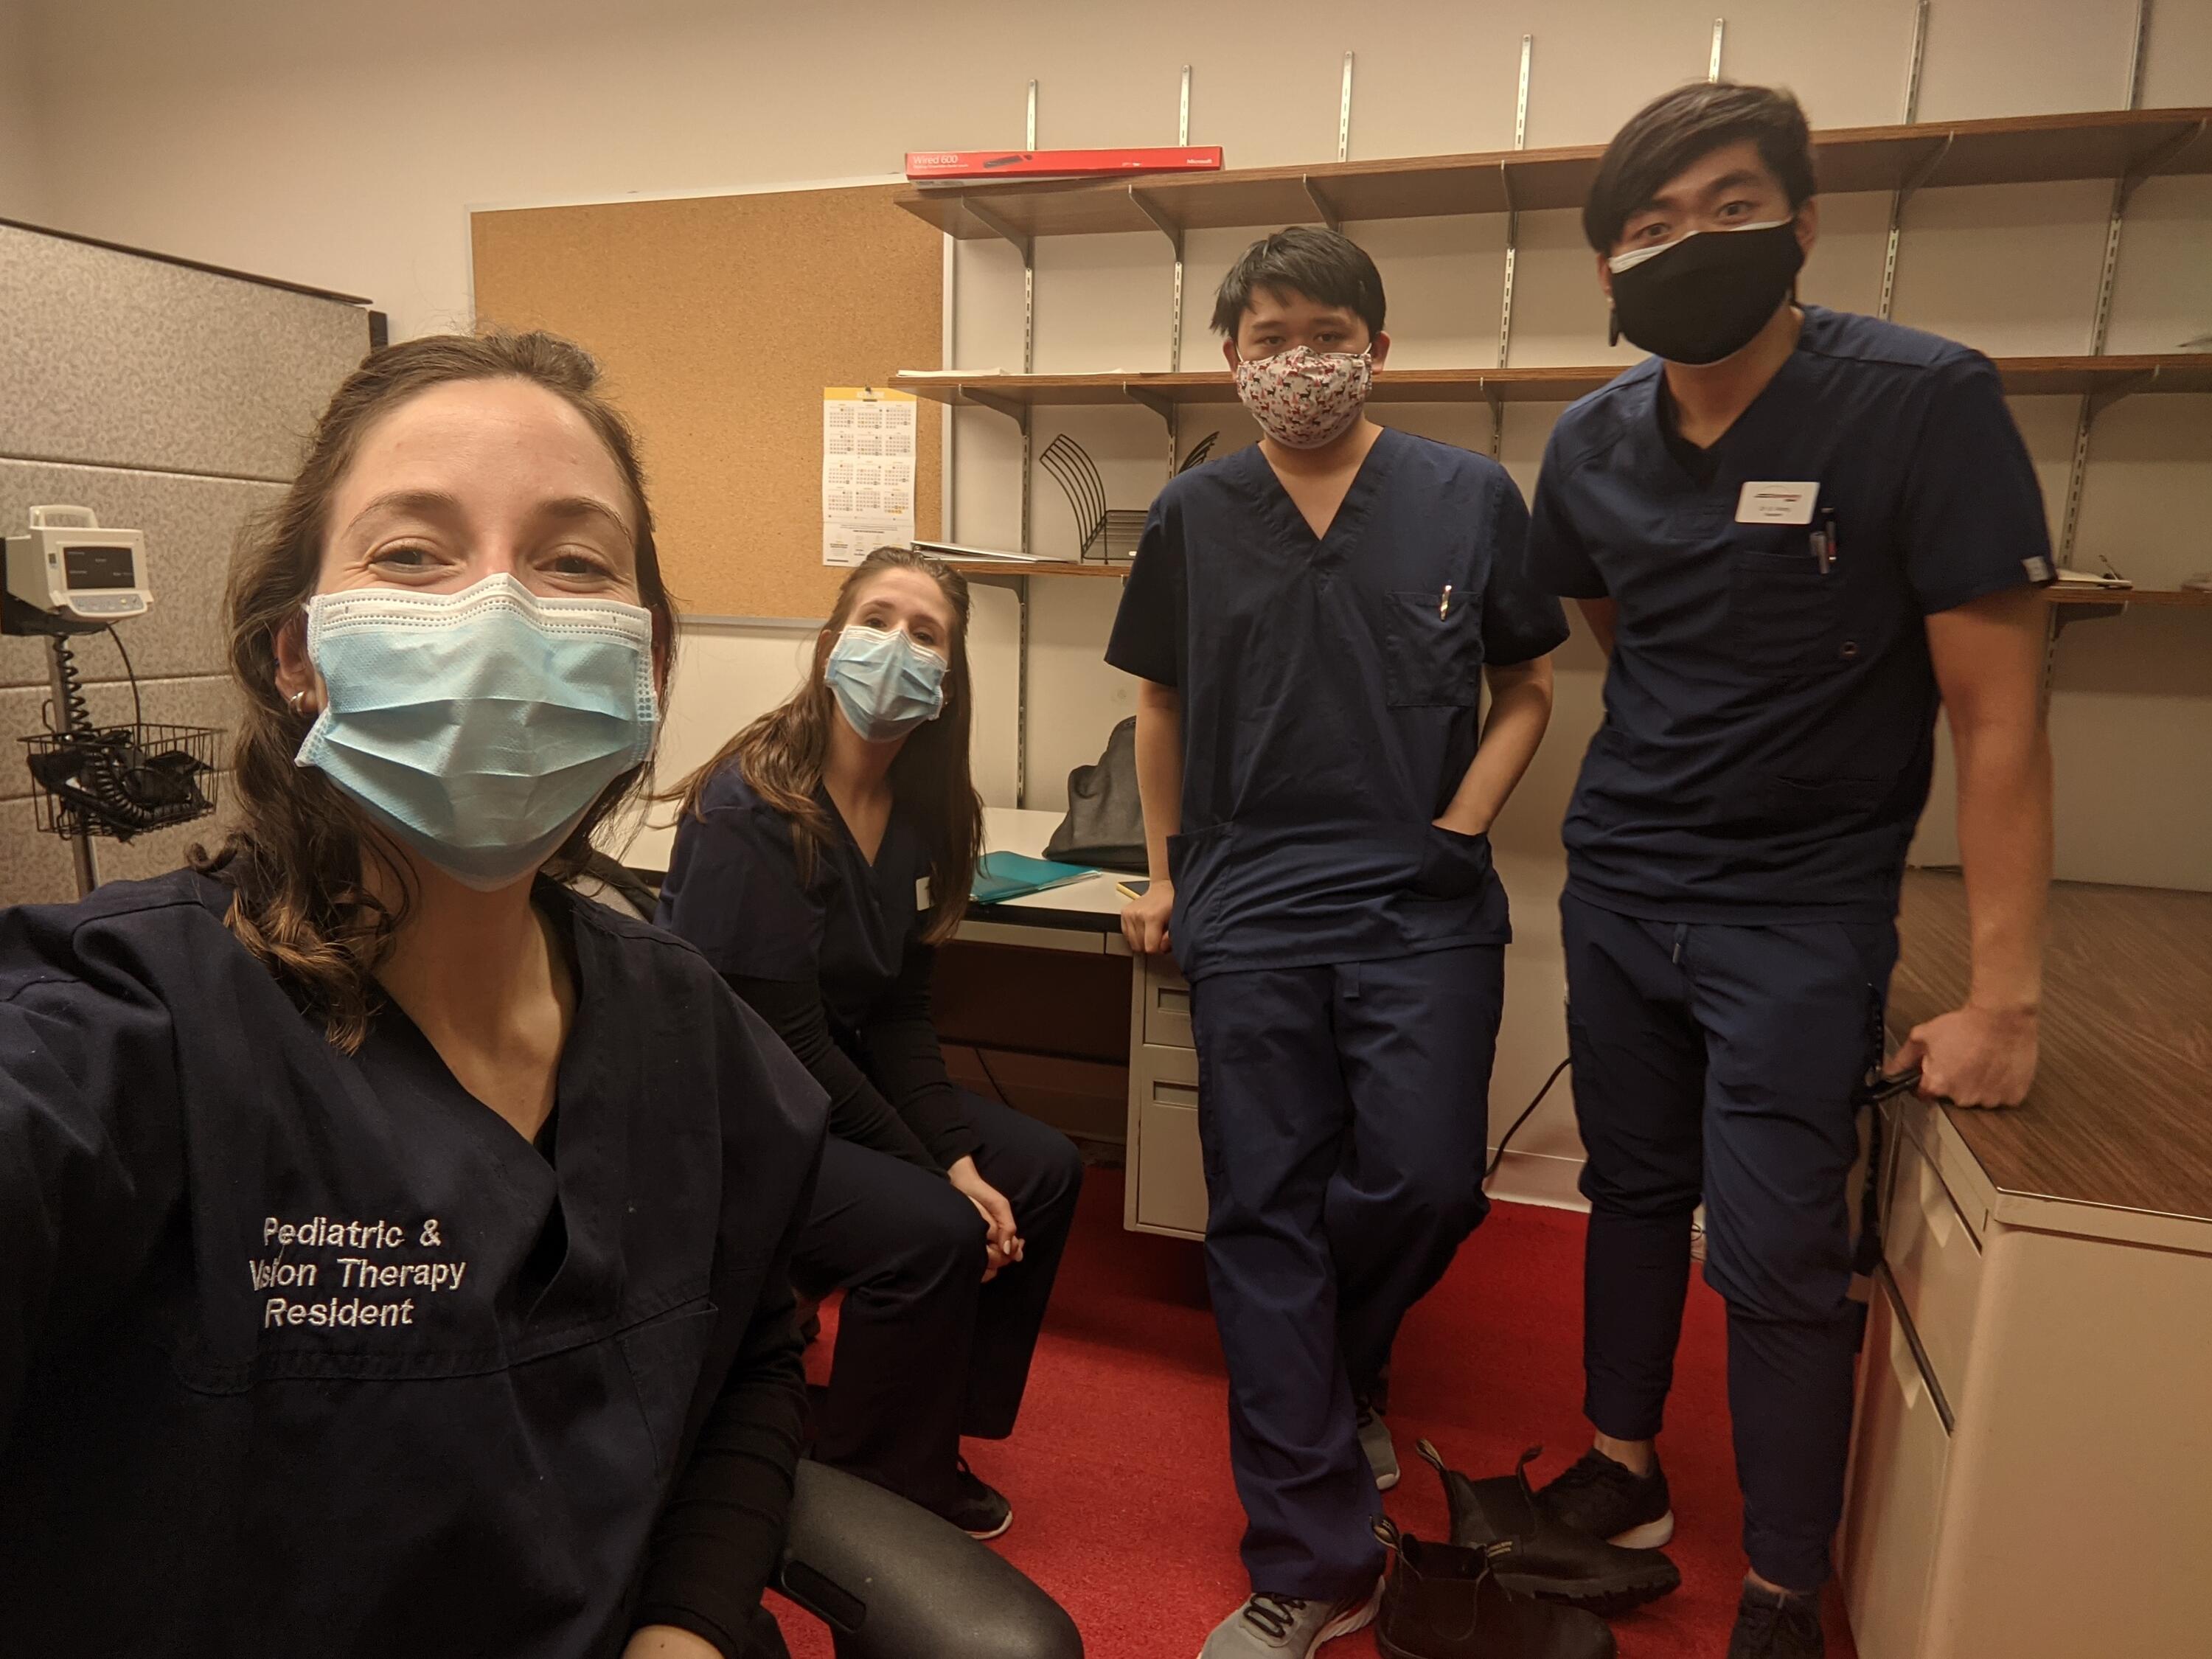 Four optometrists in an exam room - left to right: Dr. Zoe Stein, Dr. Rachel Amaral, Dr. Chen and Dr. Wong